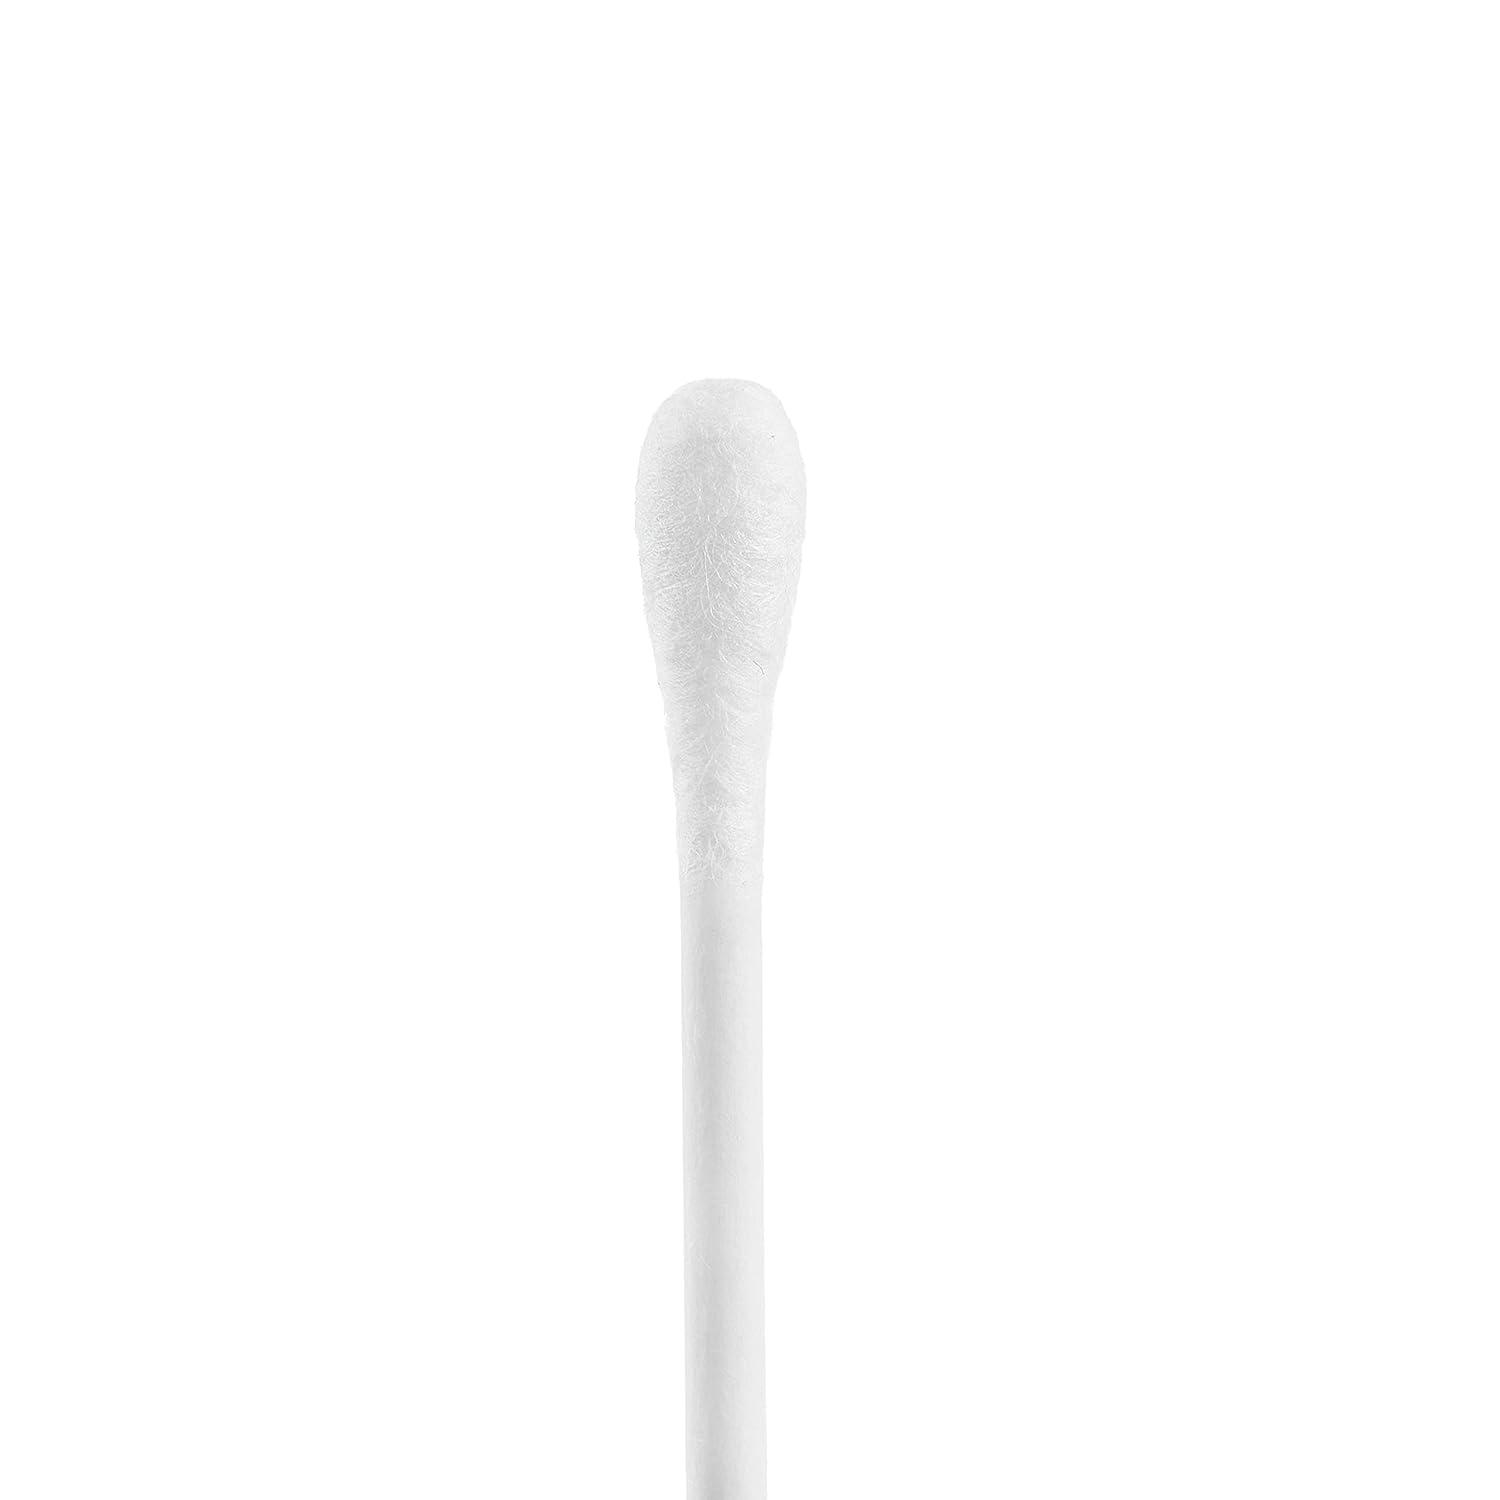  Pointed Q Tips Qtip Bleeker and Röwe Individually Wrapped  Cotton Swabs 180 Count - Recyclable & Biodegreadable - Perfect for Makeup  Travel Qtips Travel Size Travel q tips travel cotton